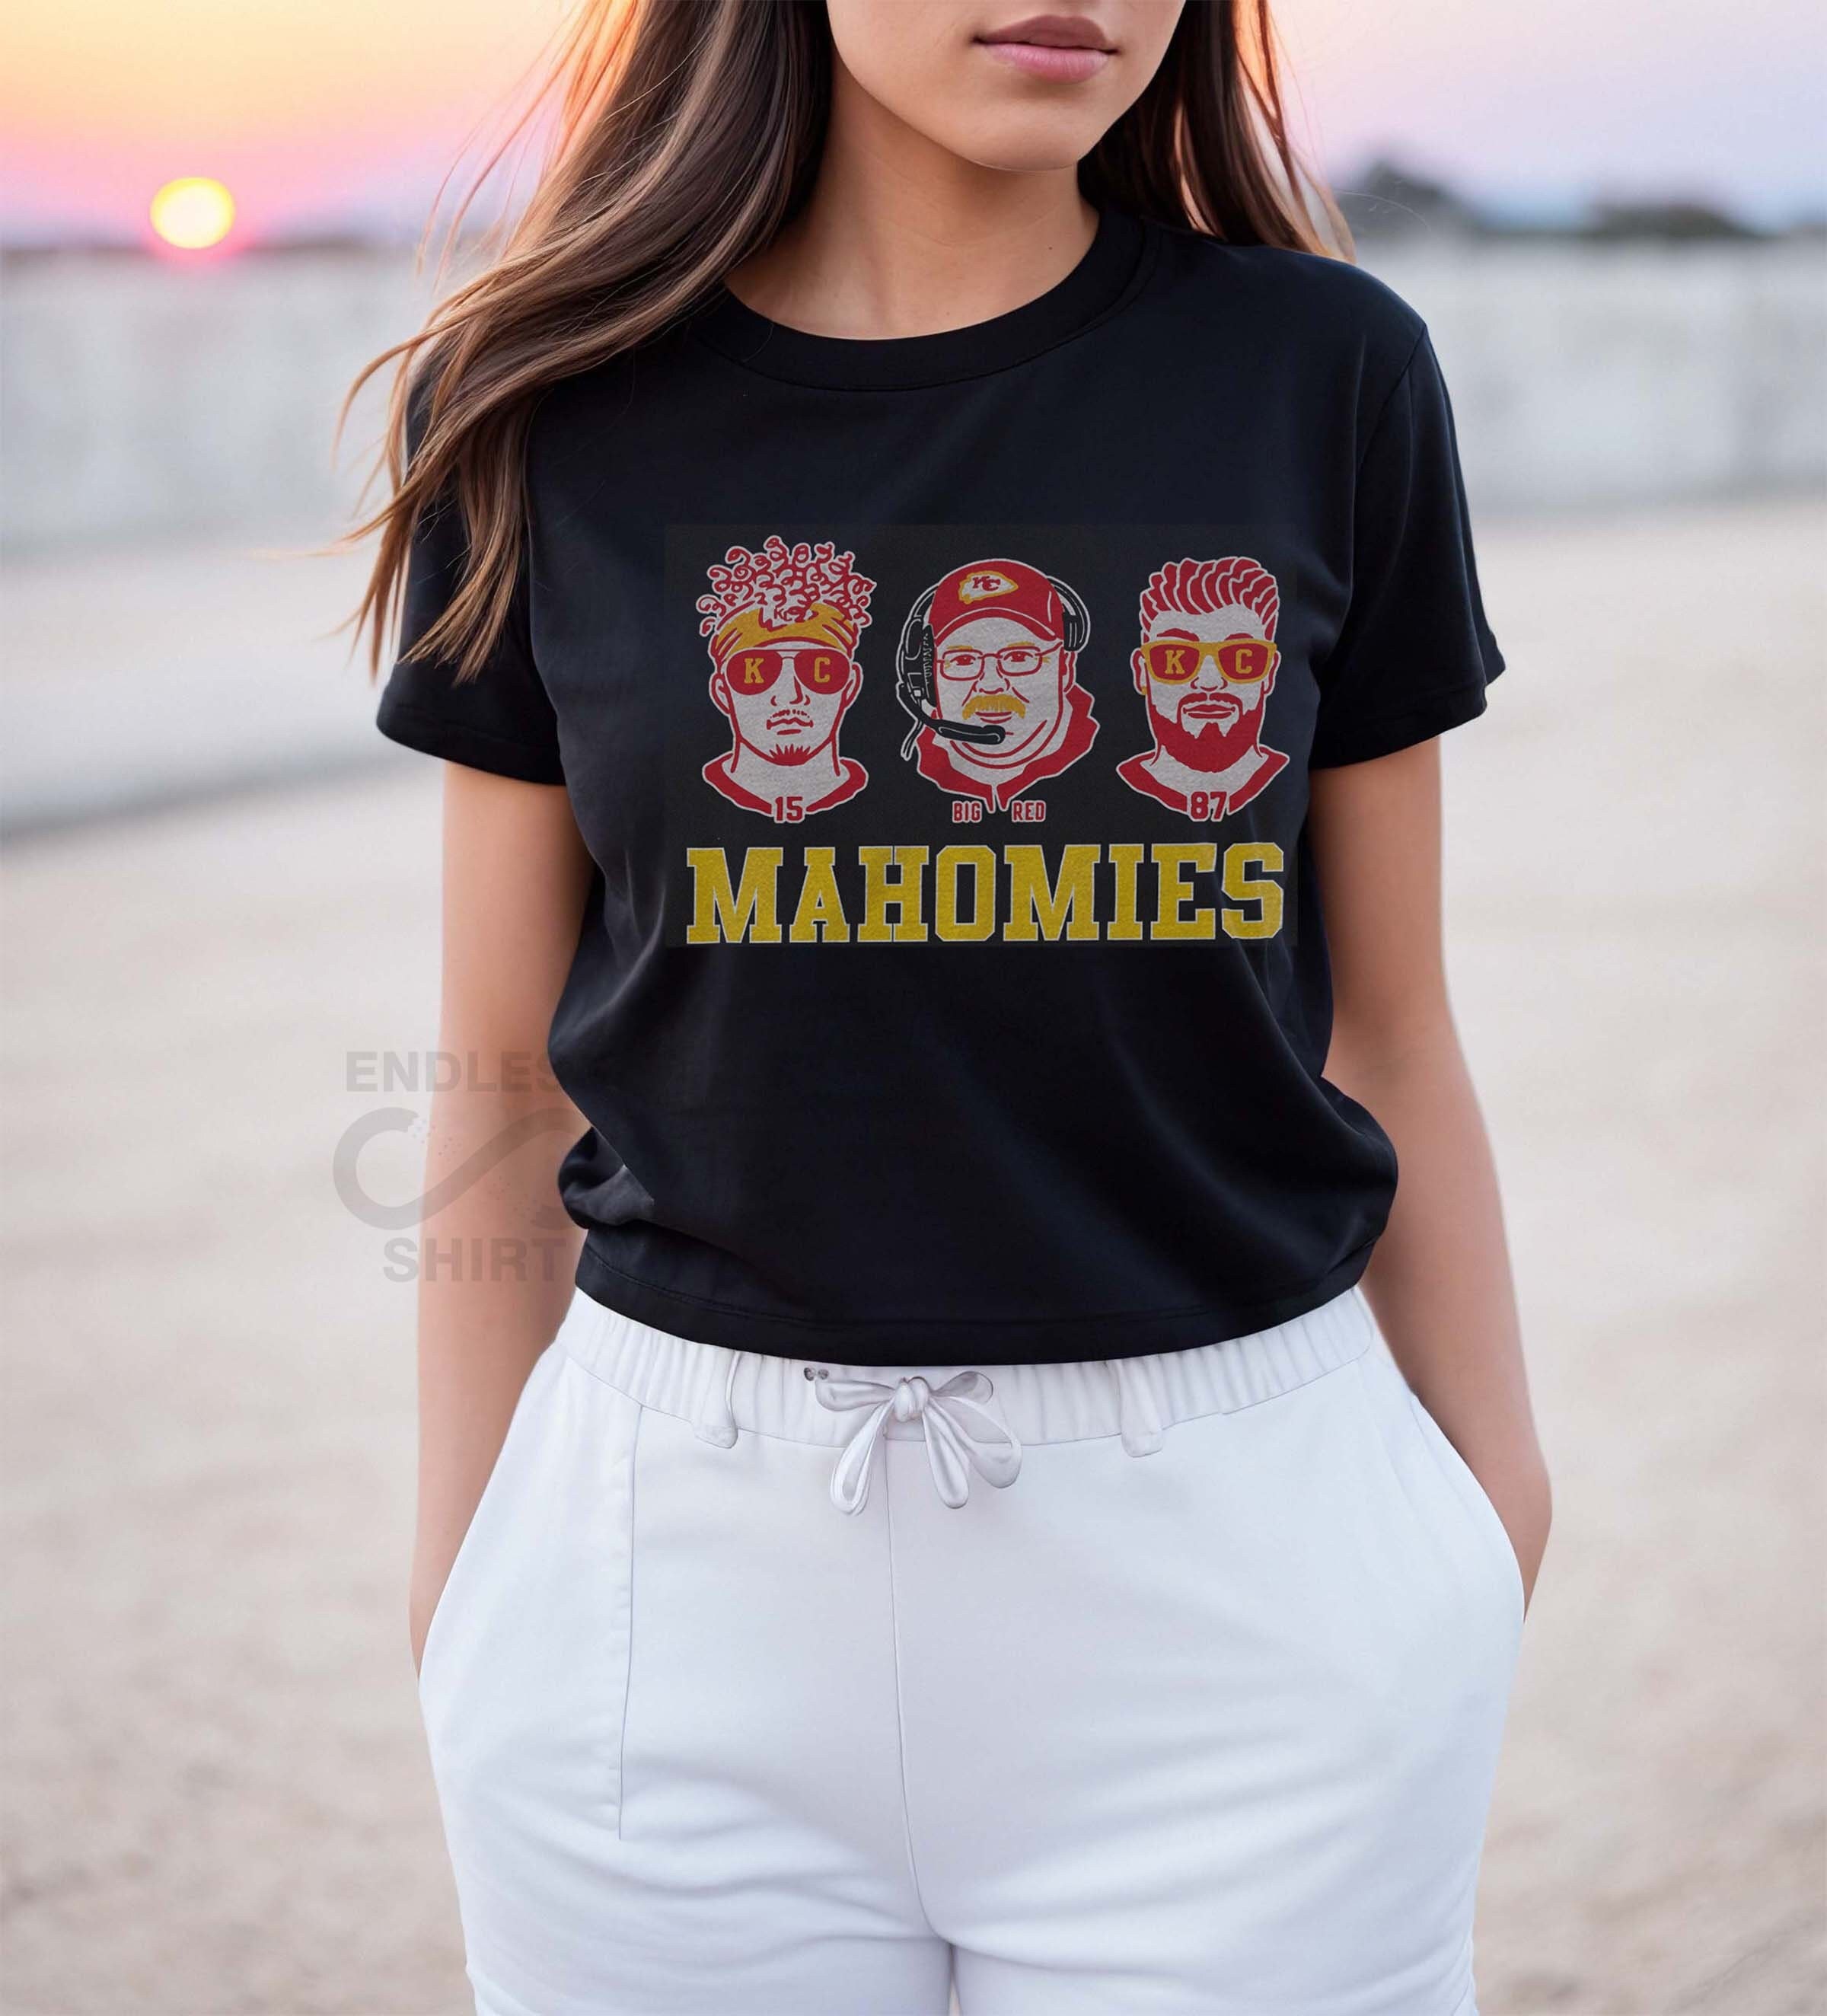  Patrick is Mahomie Kansas City Mens Soft Funny Tee Designed  Locally in KC Fan Adult Football Jersery Number Mahomes Shirt (XL) :  Handmade Products